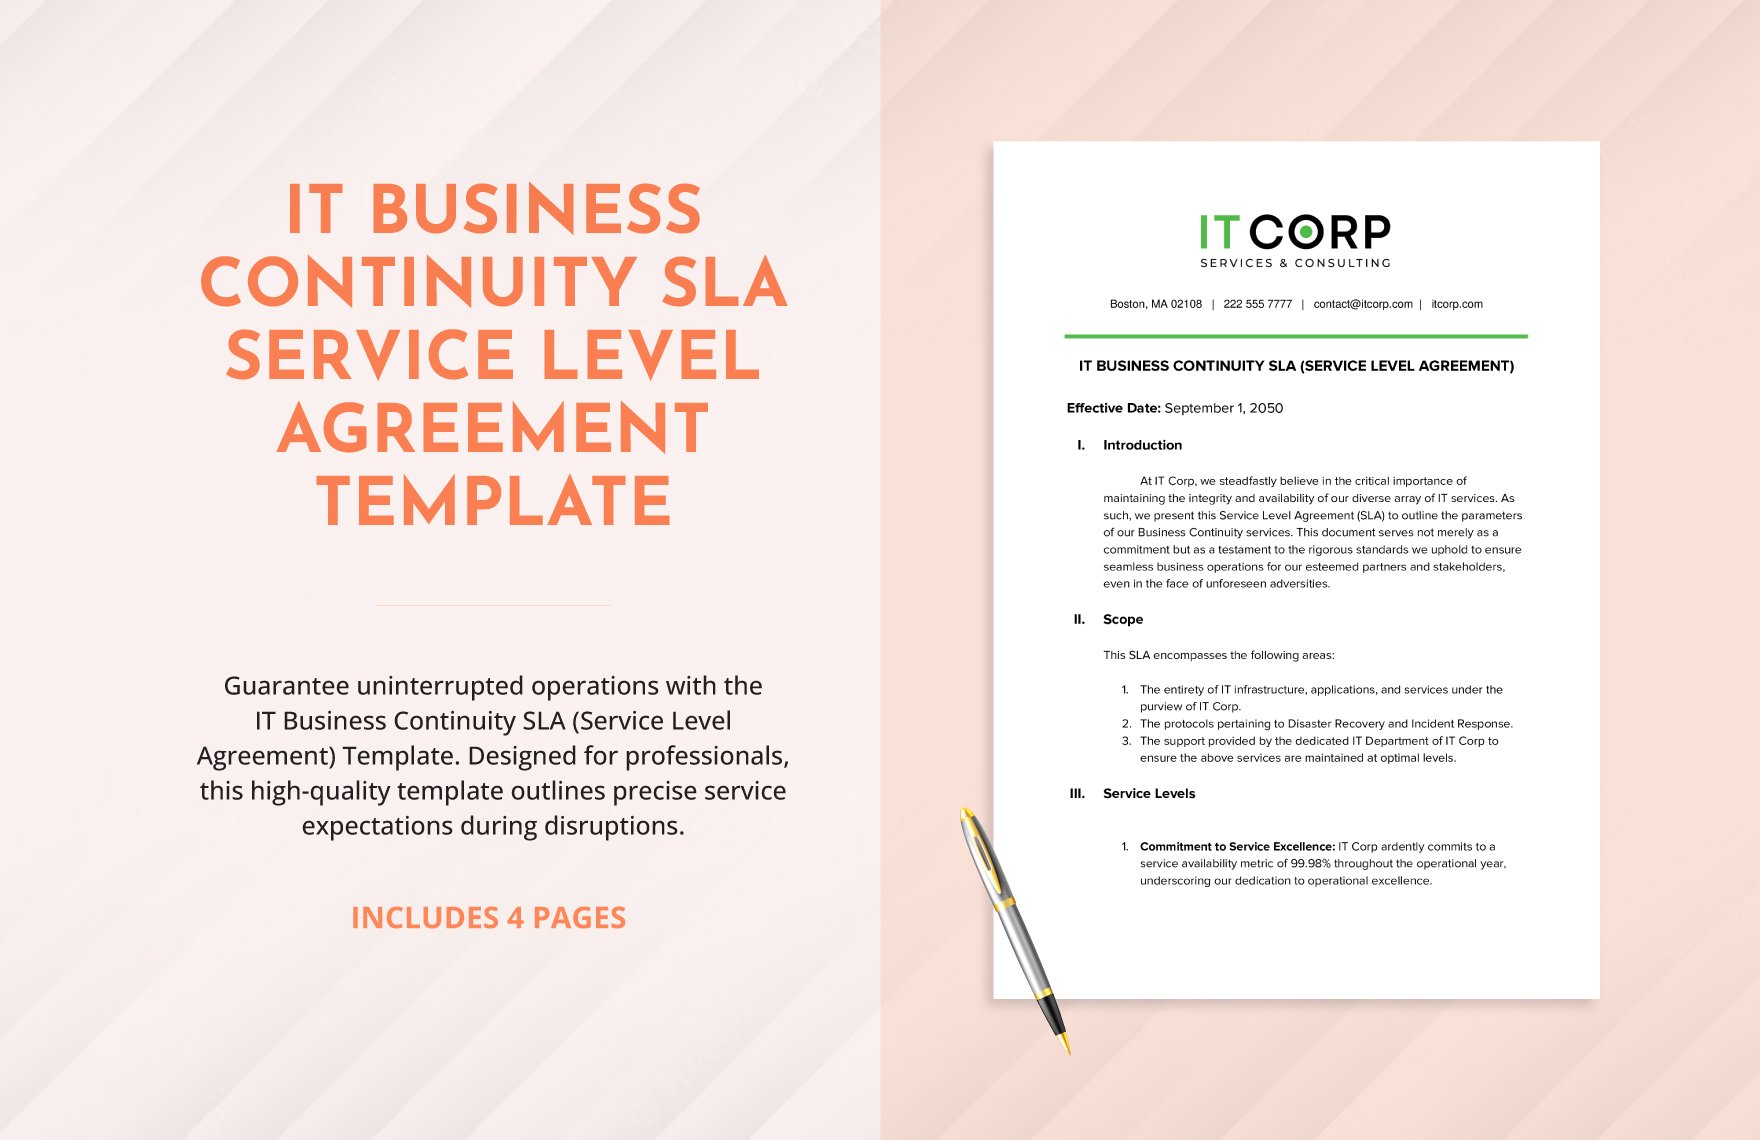 IT Business Continuity SLA (Service Level Agreement) Template